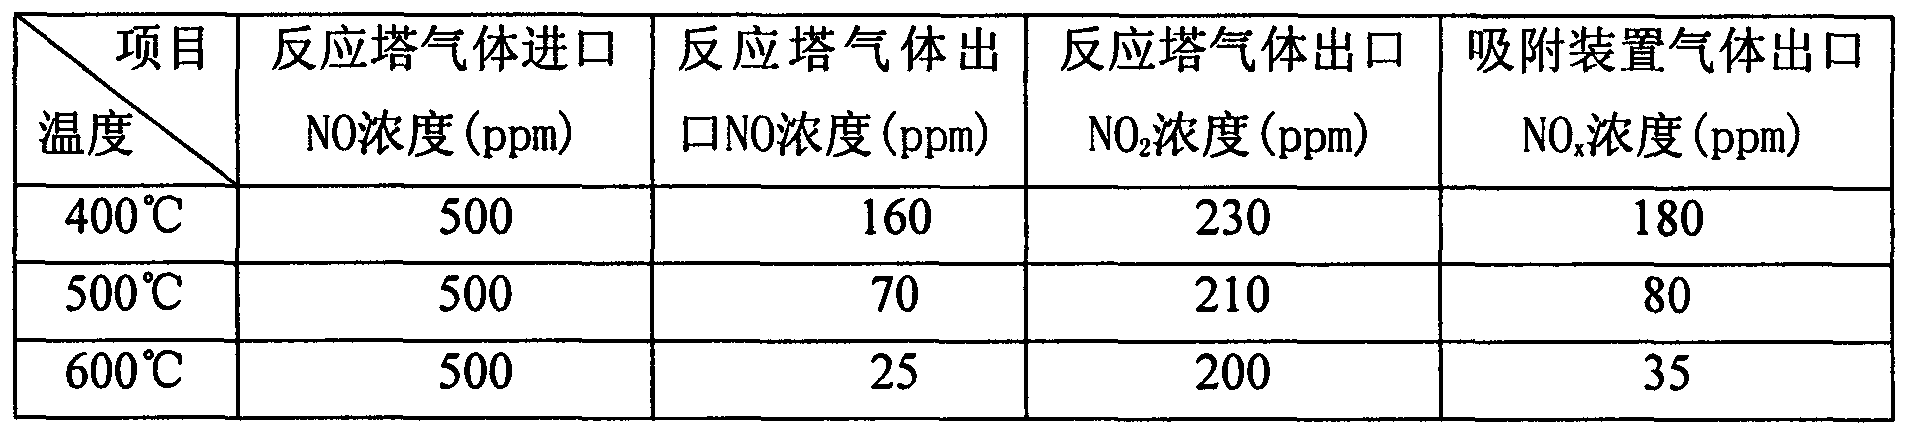 Method and device for simultaneous reduction and oxidation of nitrogen oxides from airflow